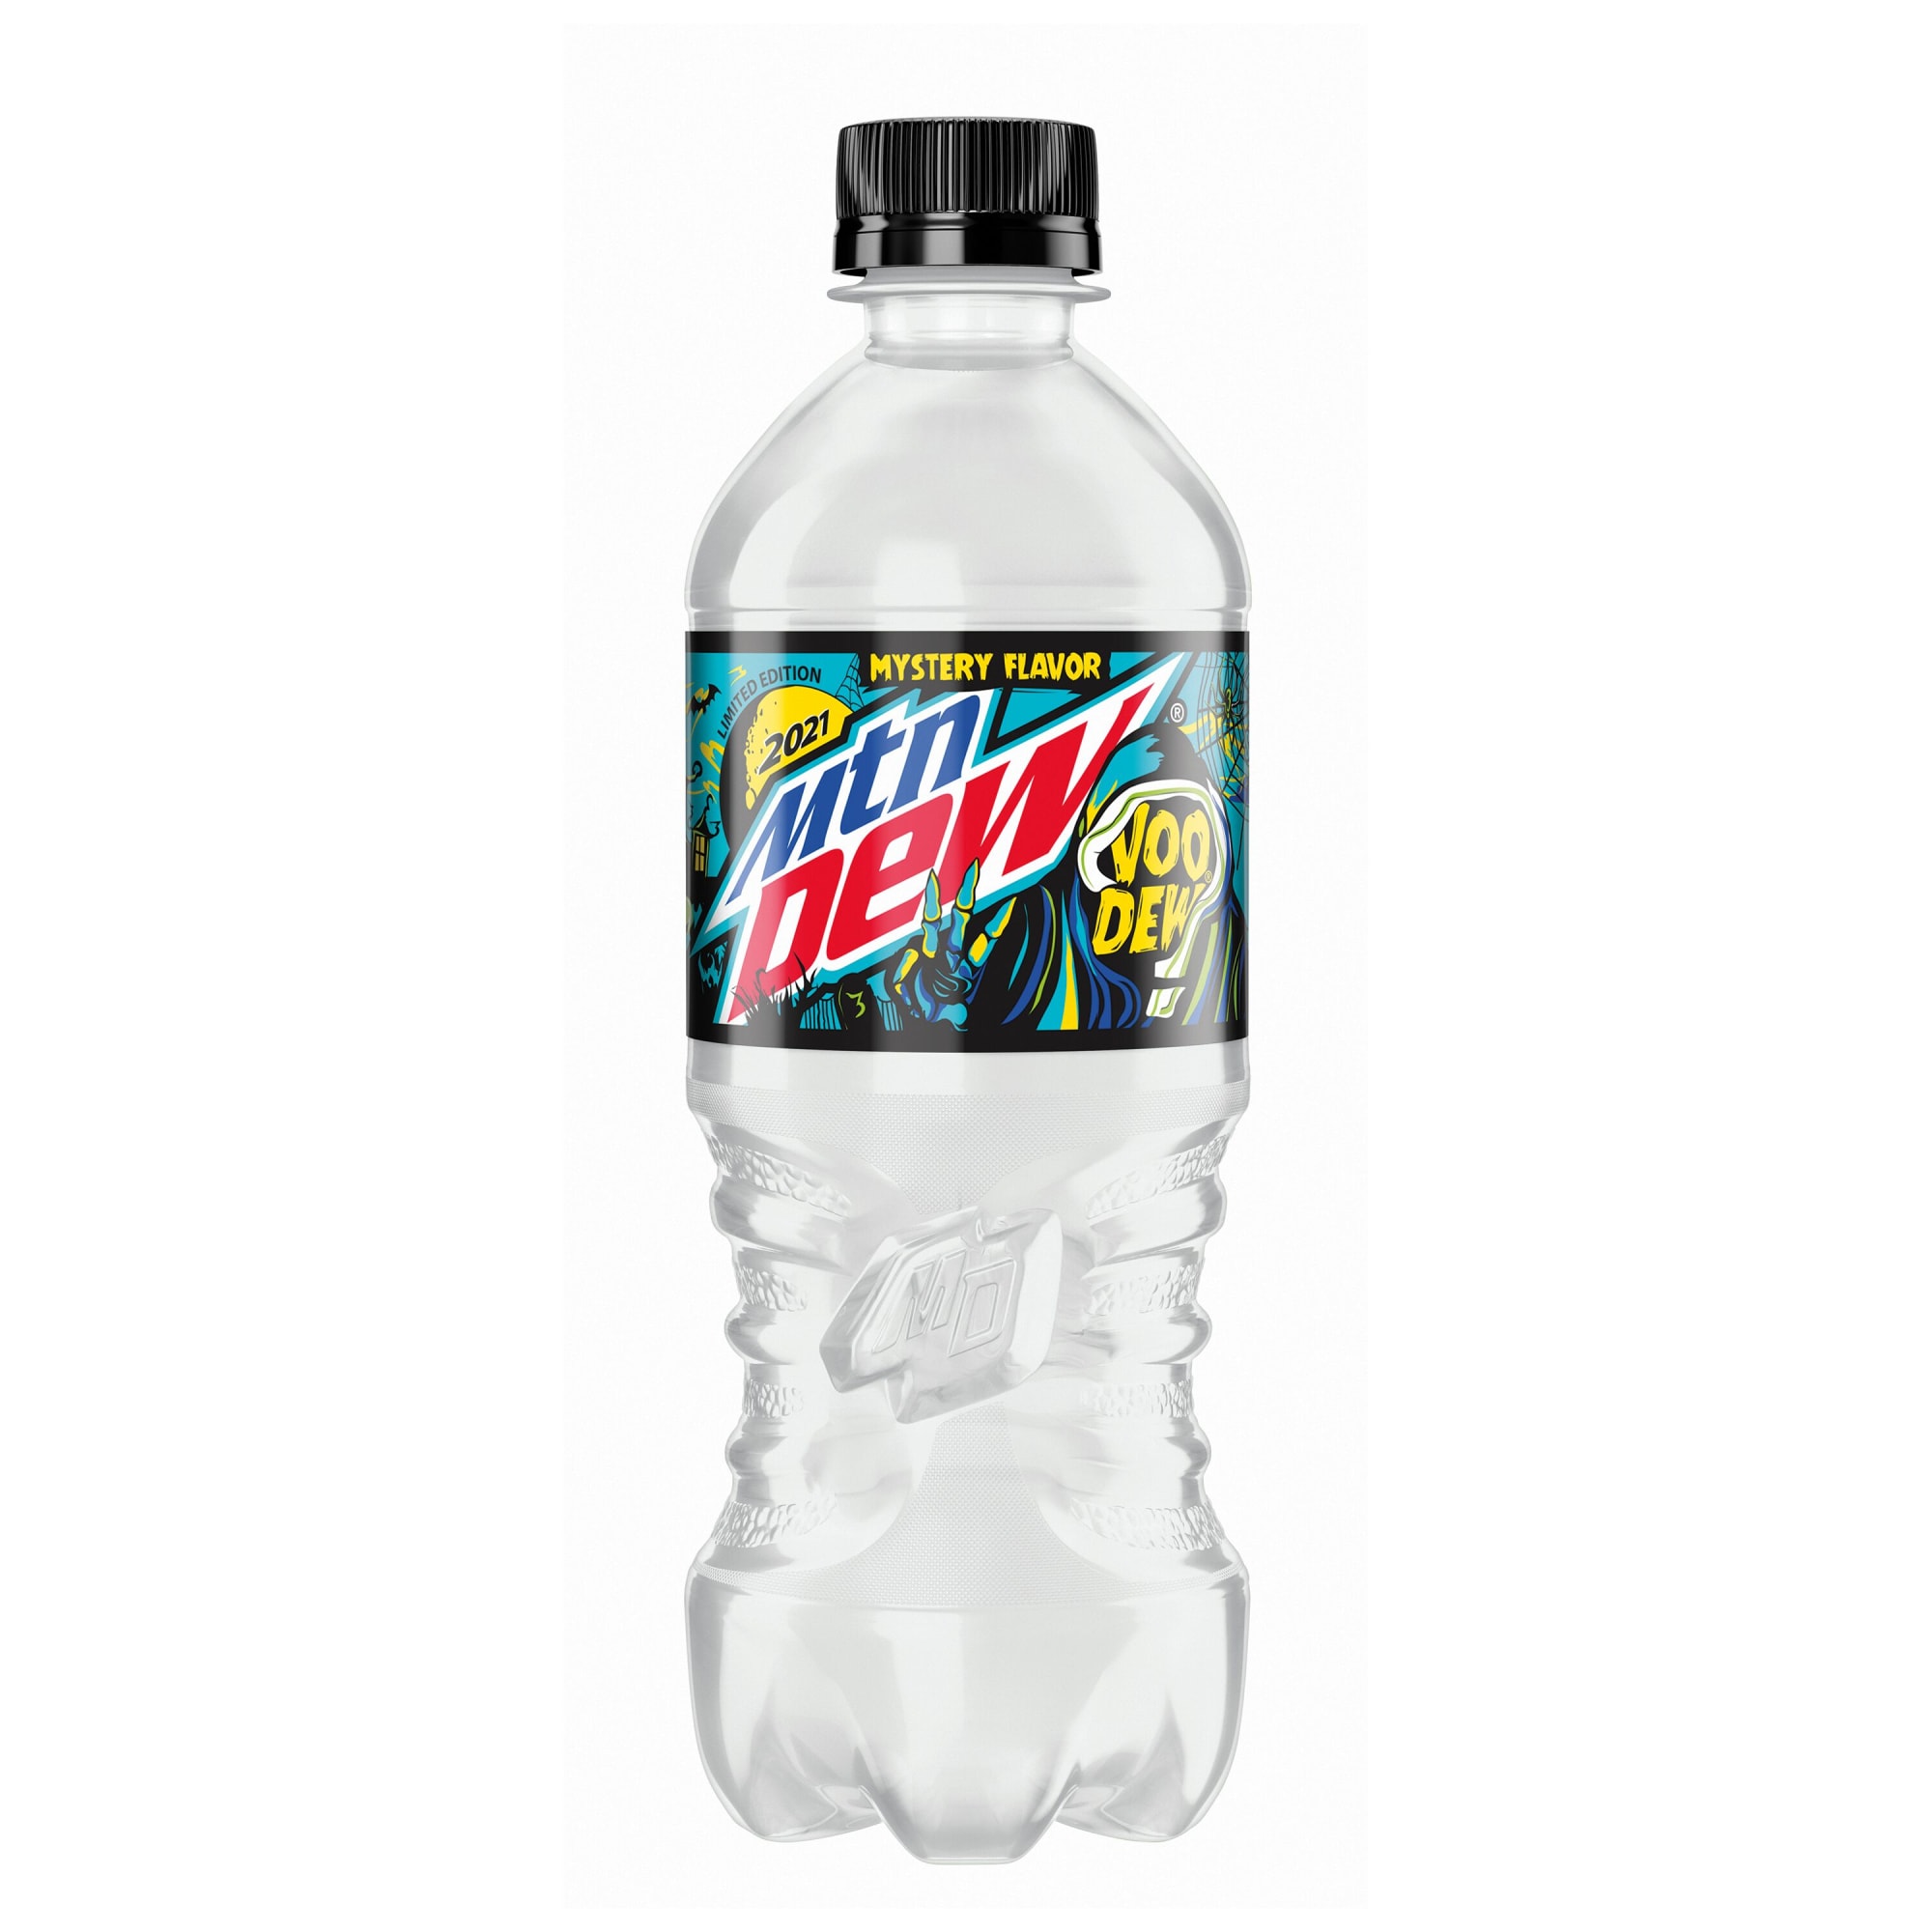 Third time is a charm, Mountain Dew VooDew 2021 is here